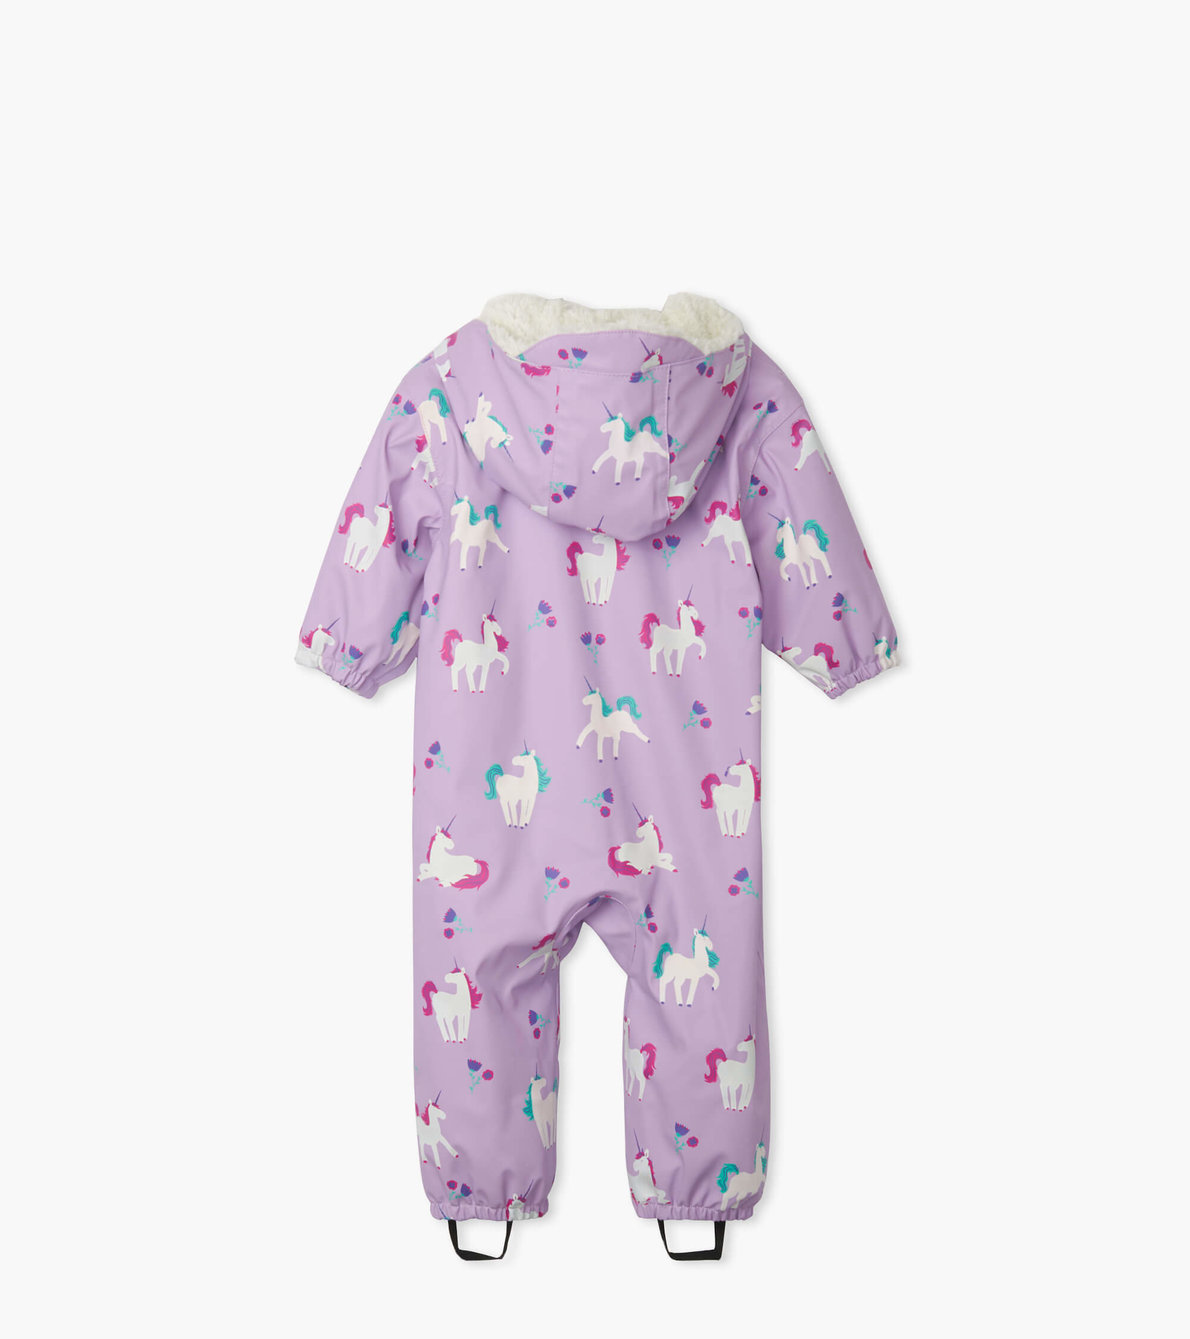 View larger image of Playful Unicorns Sherpa Lined Colour Changing Baby Bundler